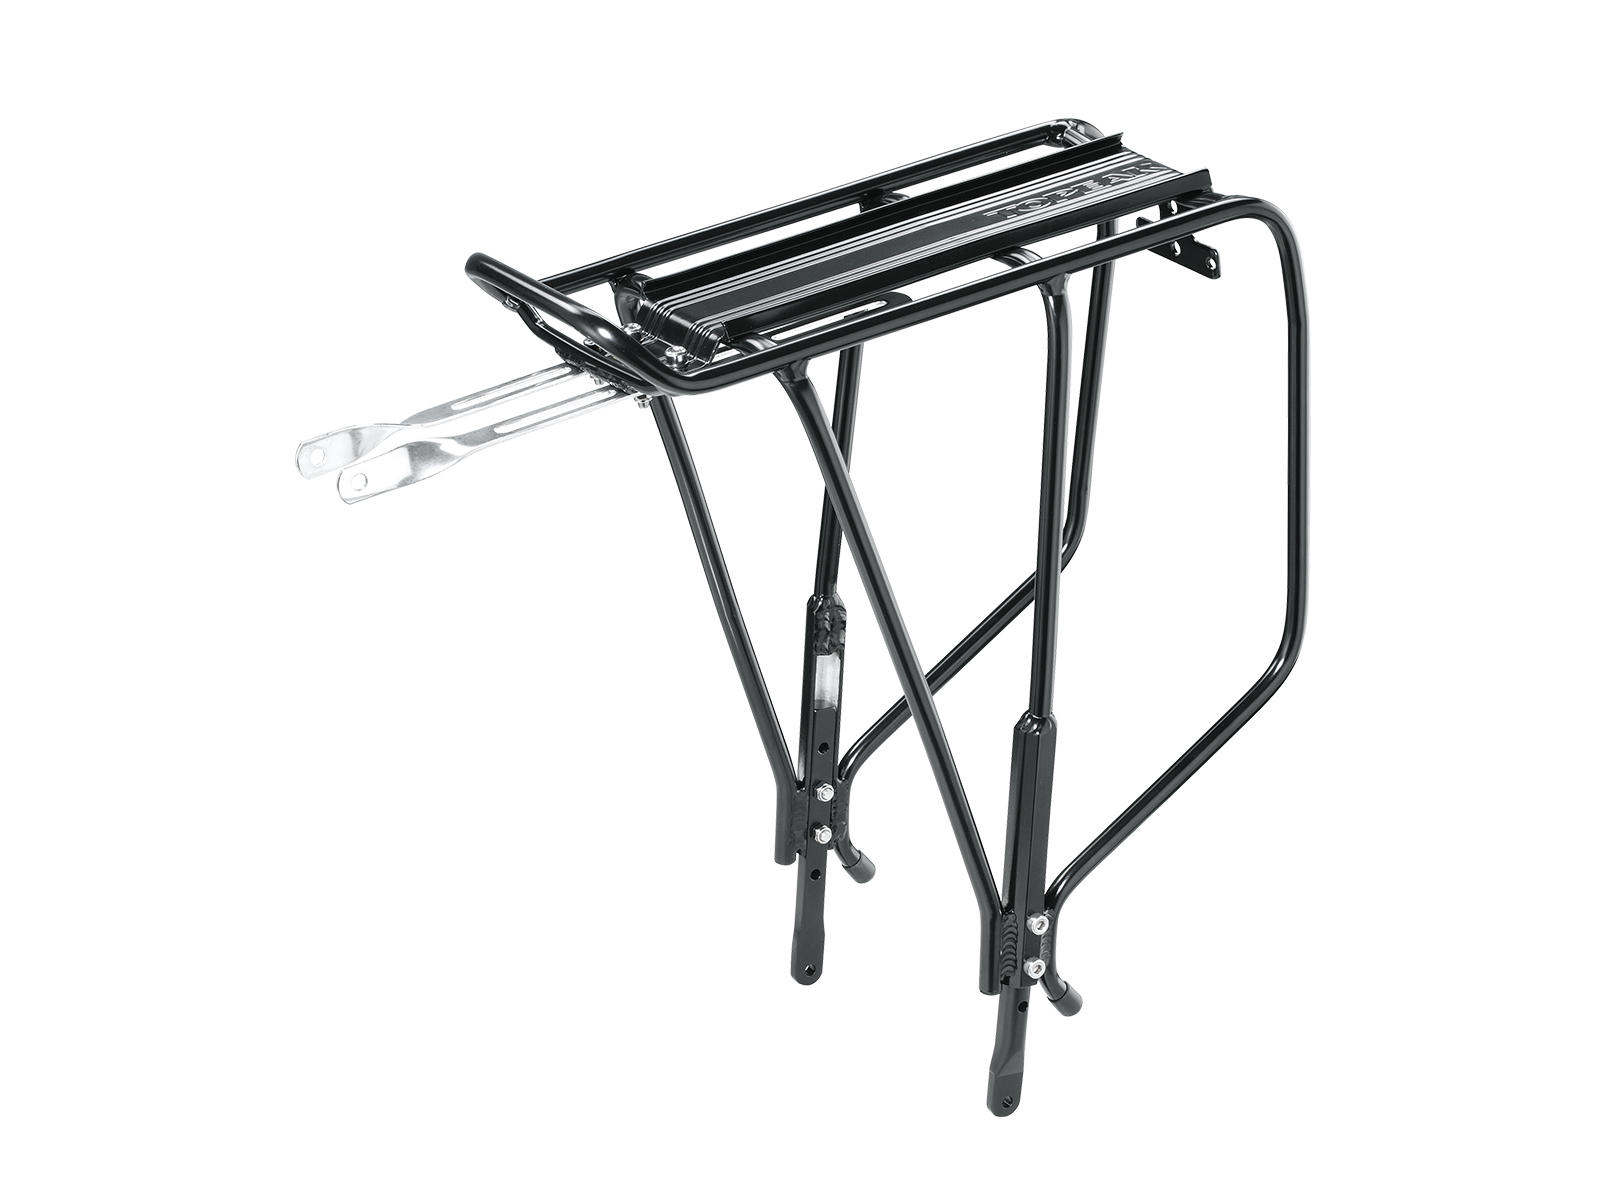 Topeak Uni SuperTourist Bicycle Rack Non Disc Mount - 24 inch to 29 and 700c wheels